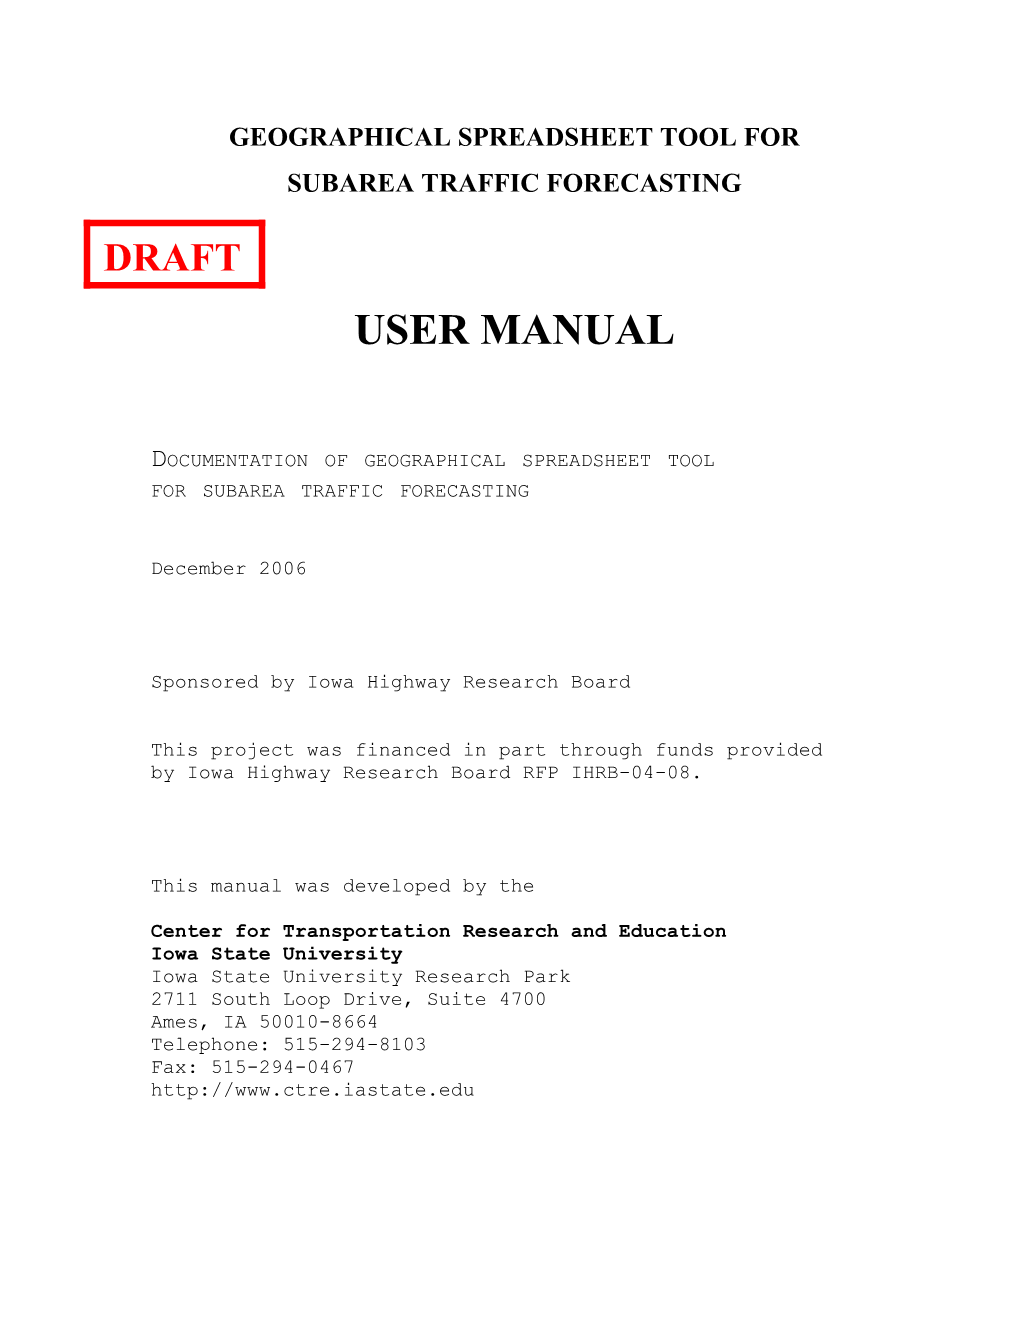 User Manual for Geographical Spreadsheet Tool